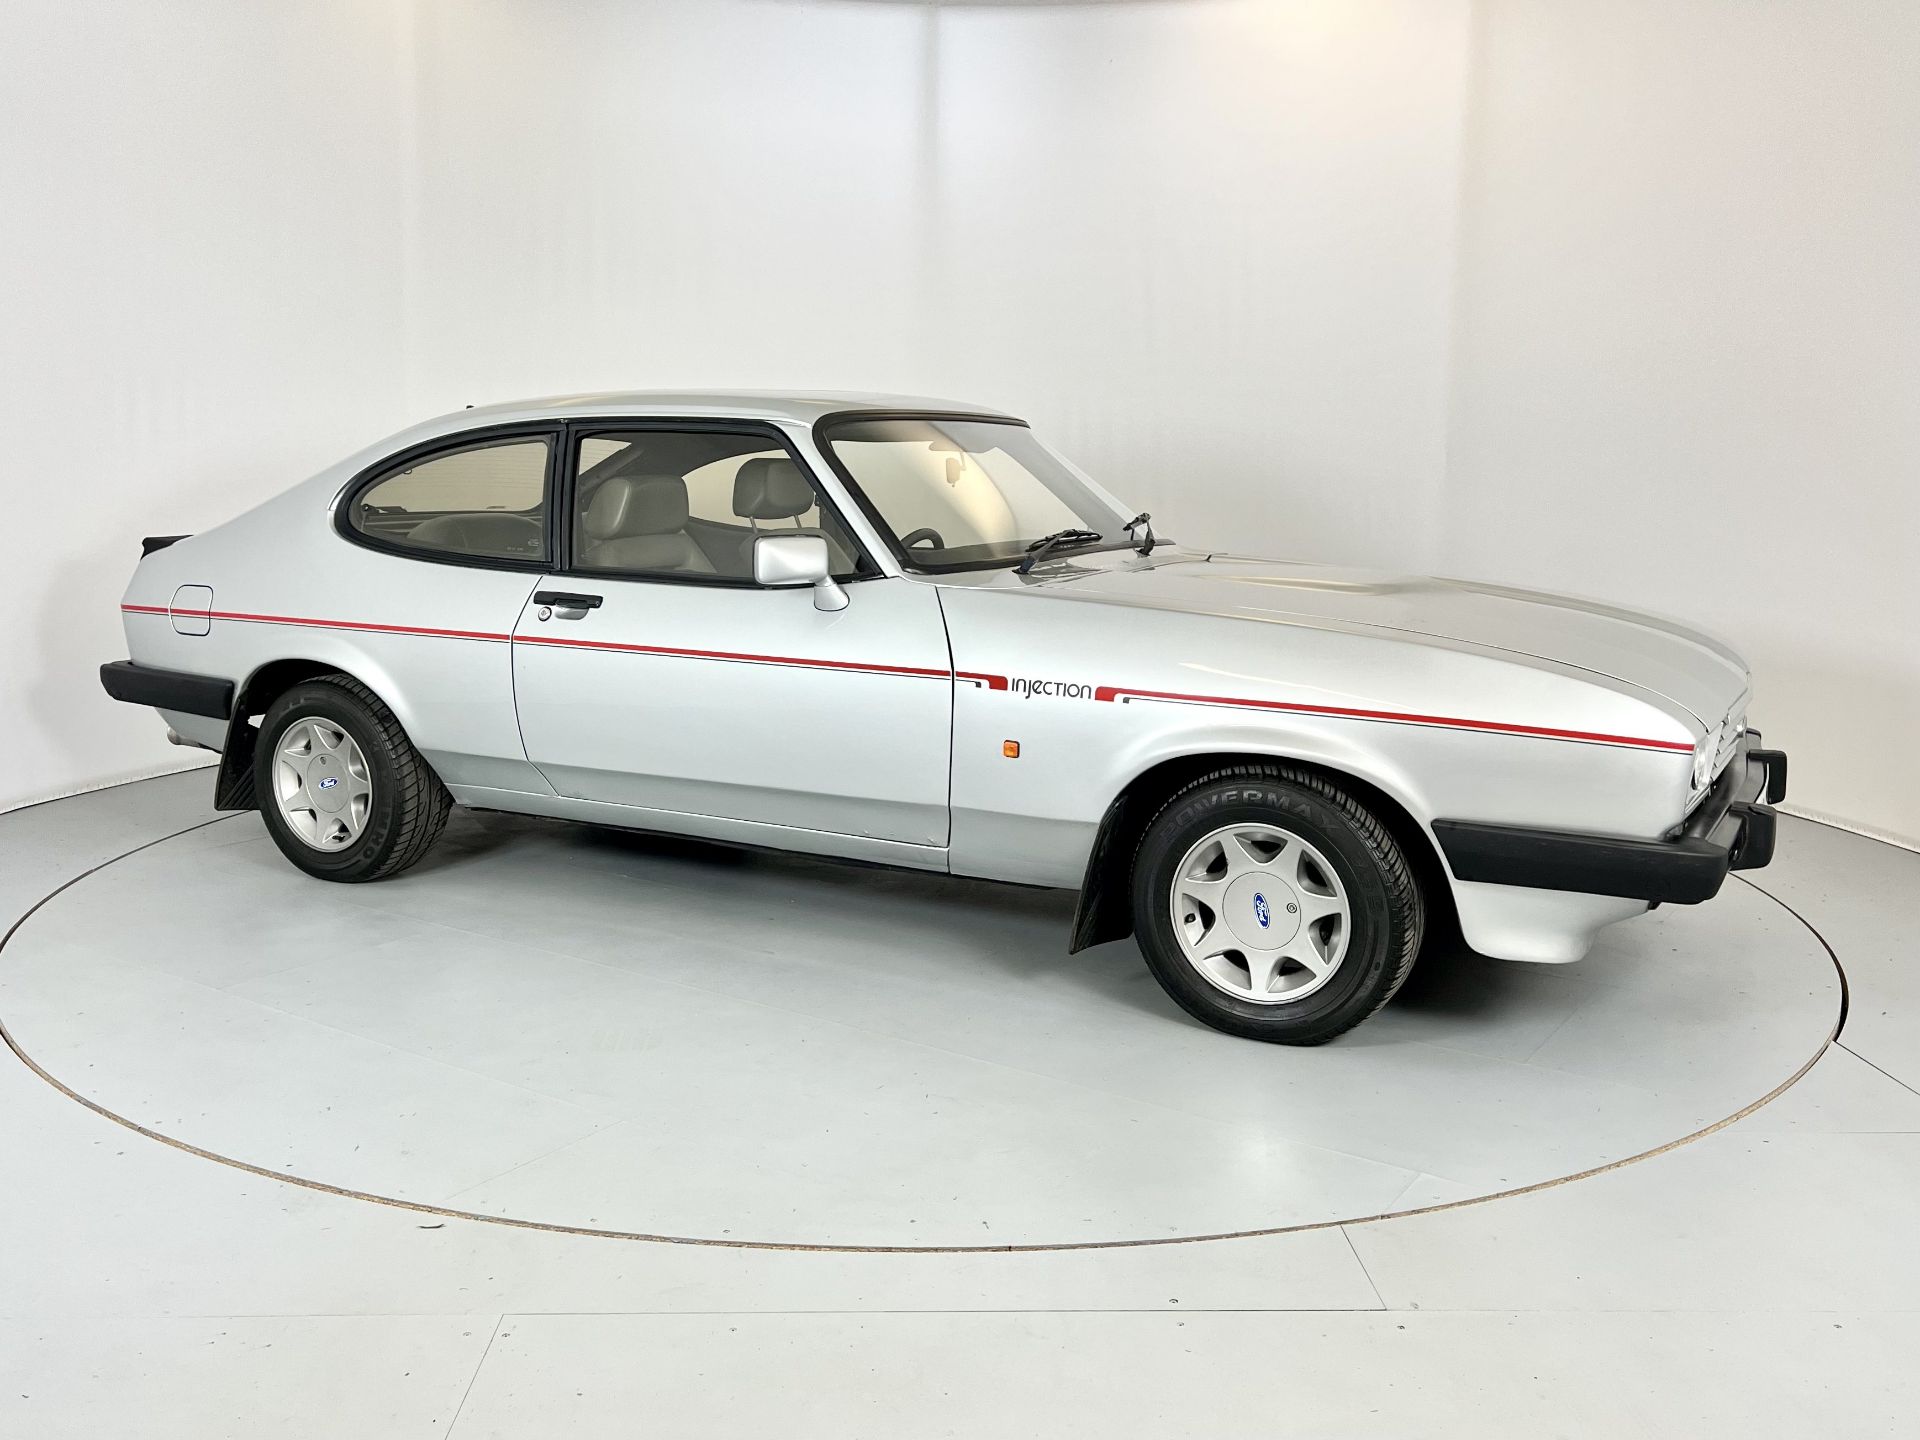 Ford Capri 2.8 Injection - Image 12 of 30